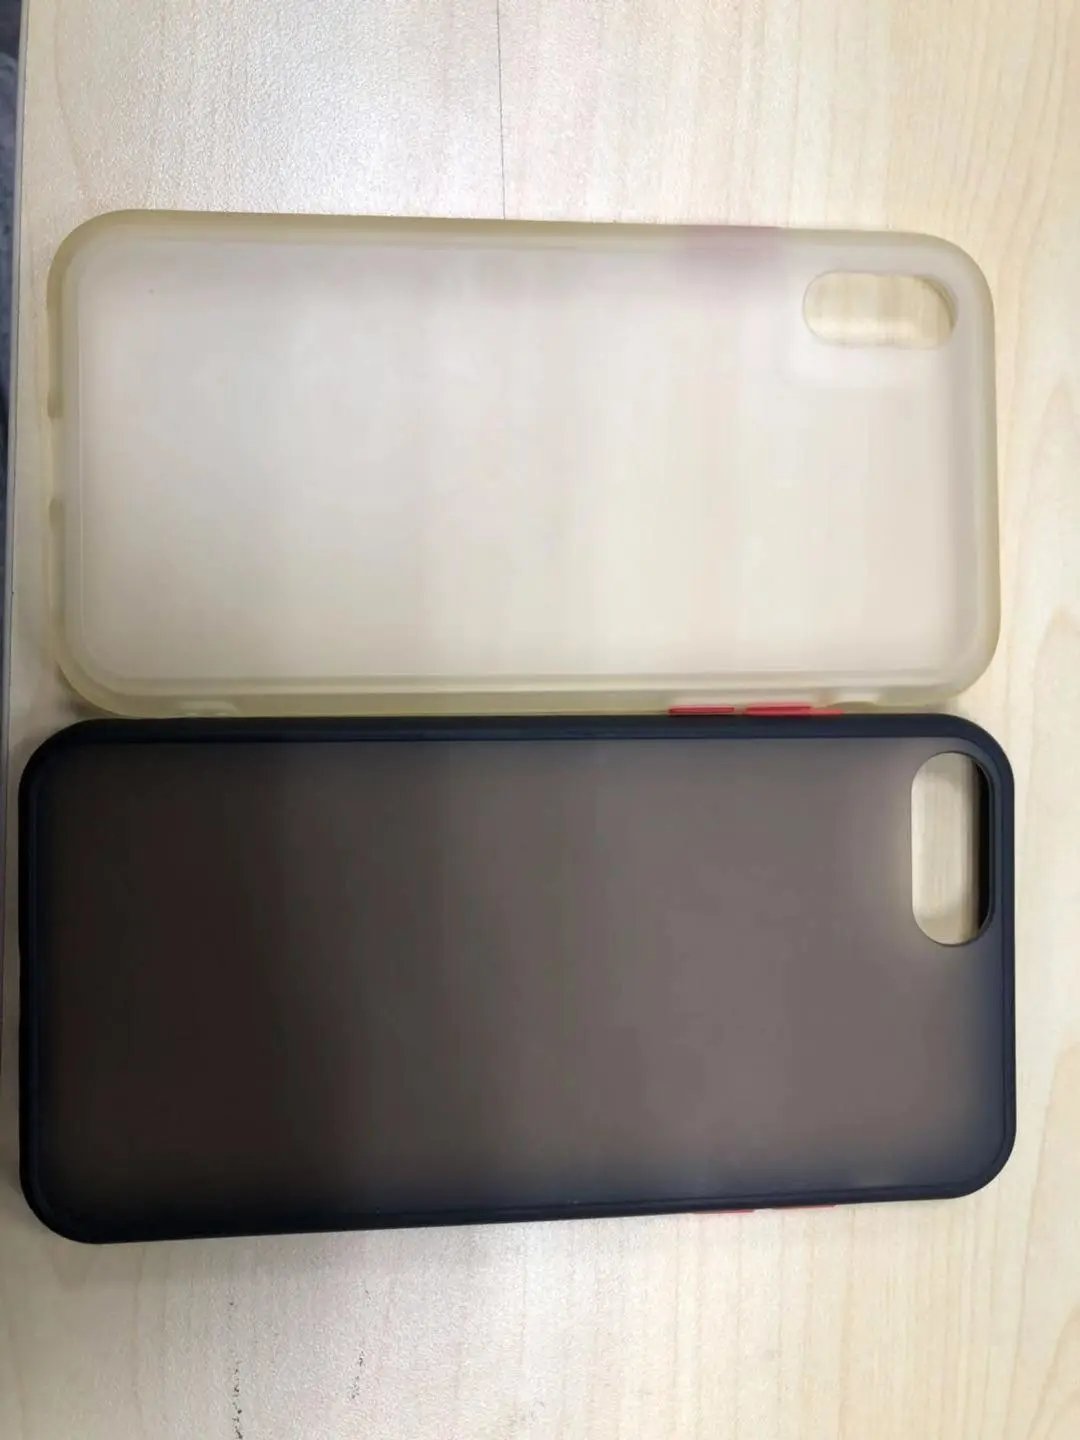 Difference between two mobile phone cases